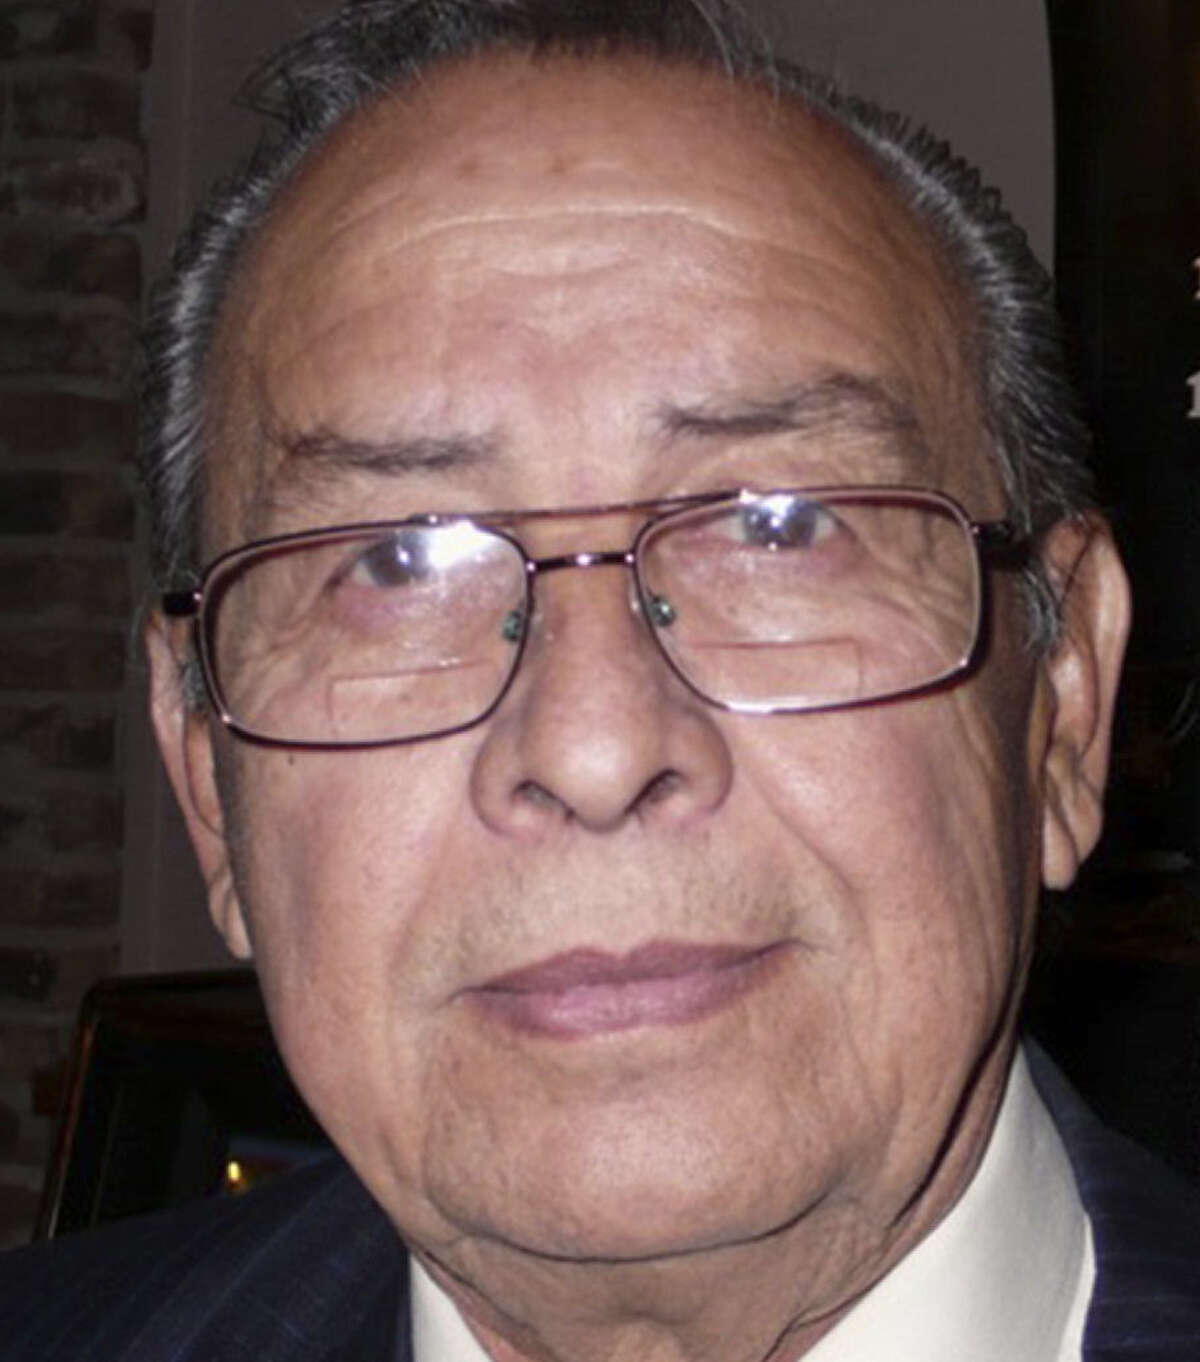 Ray Madrigal, 71, of Corpus Christi, is a candidate for governor in the March 4 Democratic primary. The part-time municipal court judge in the tiny coastal town of Seadrift is the lone primary opponent to heavily-favored gubernatorial candidate Wendy Davis. HeÂÃÃ?–s shown in San Antonio campaigning at a Bexar County Democratic Party event on Dec. 17.